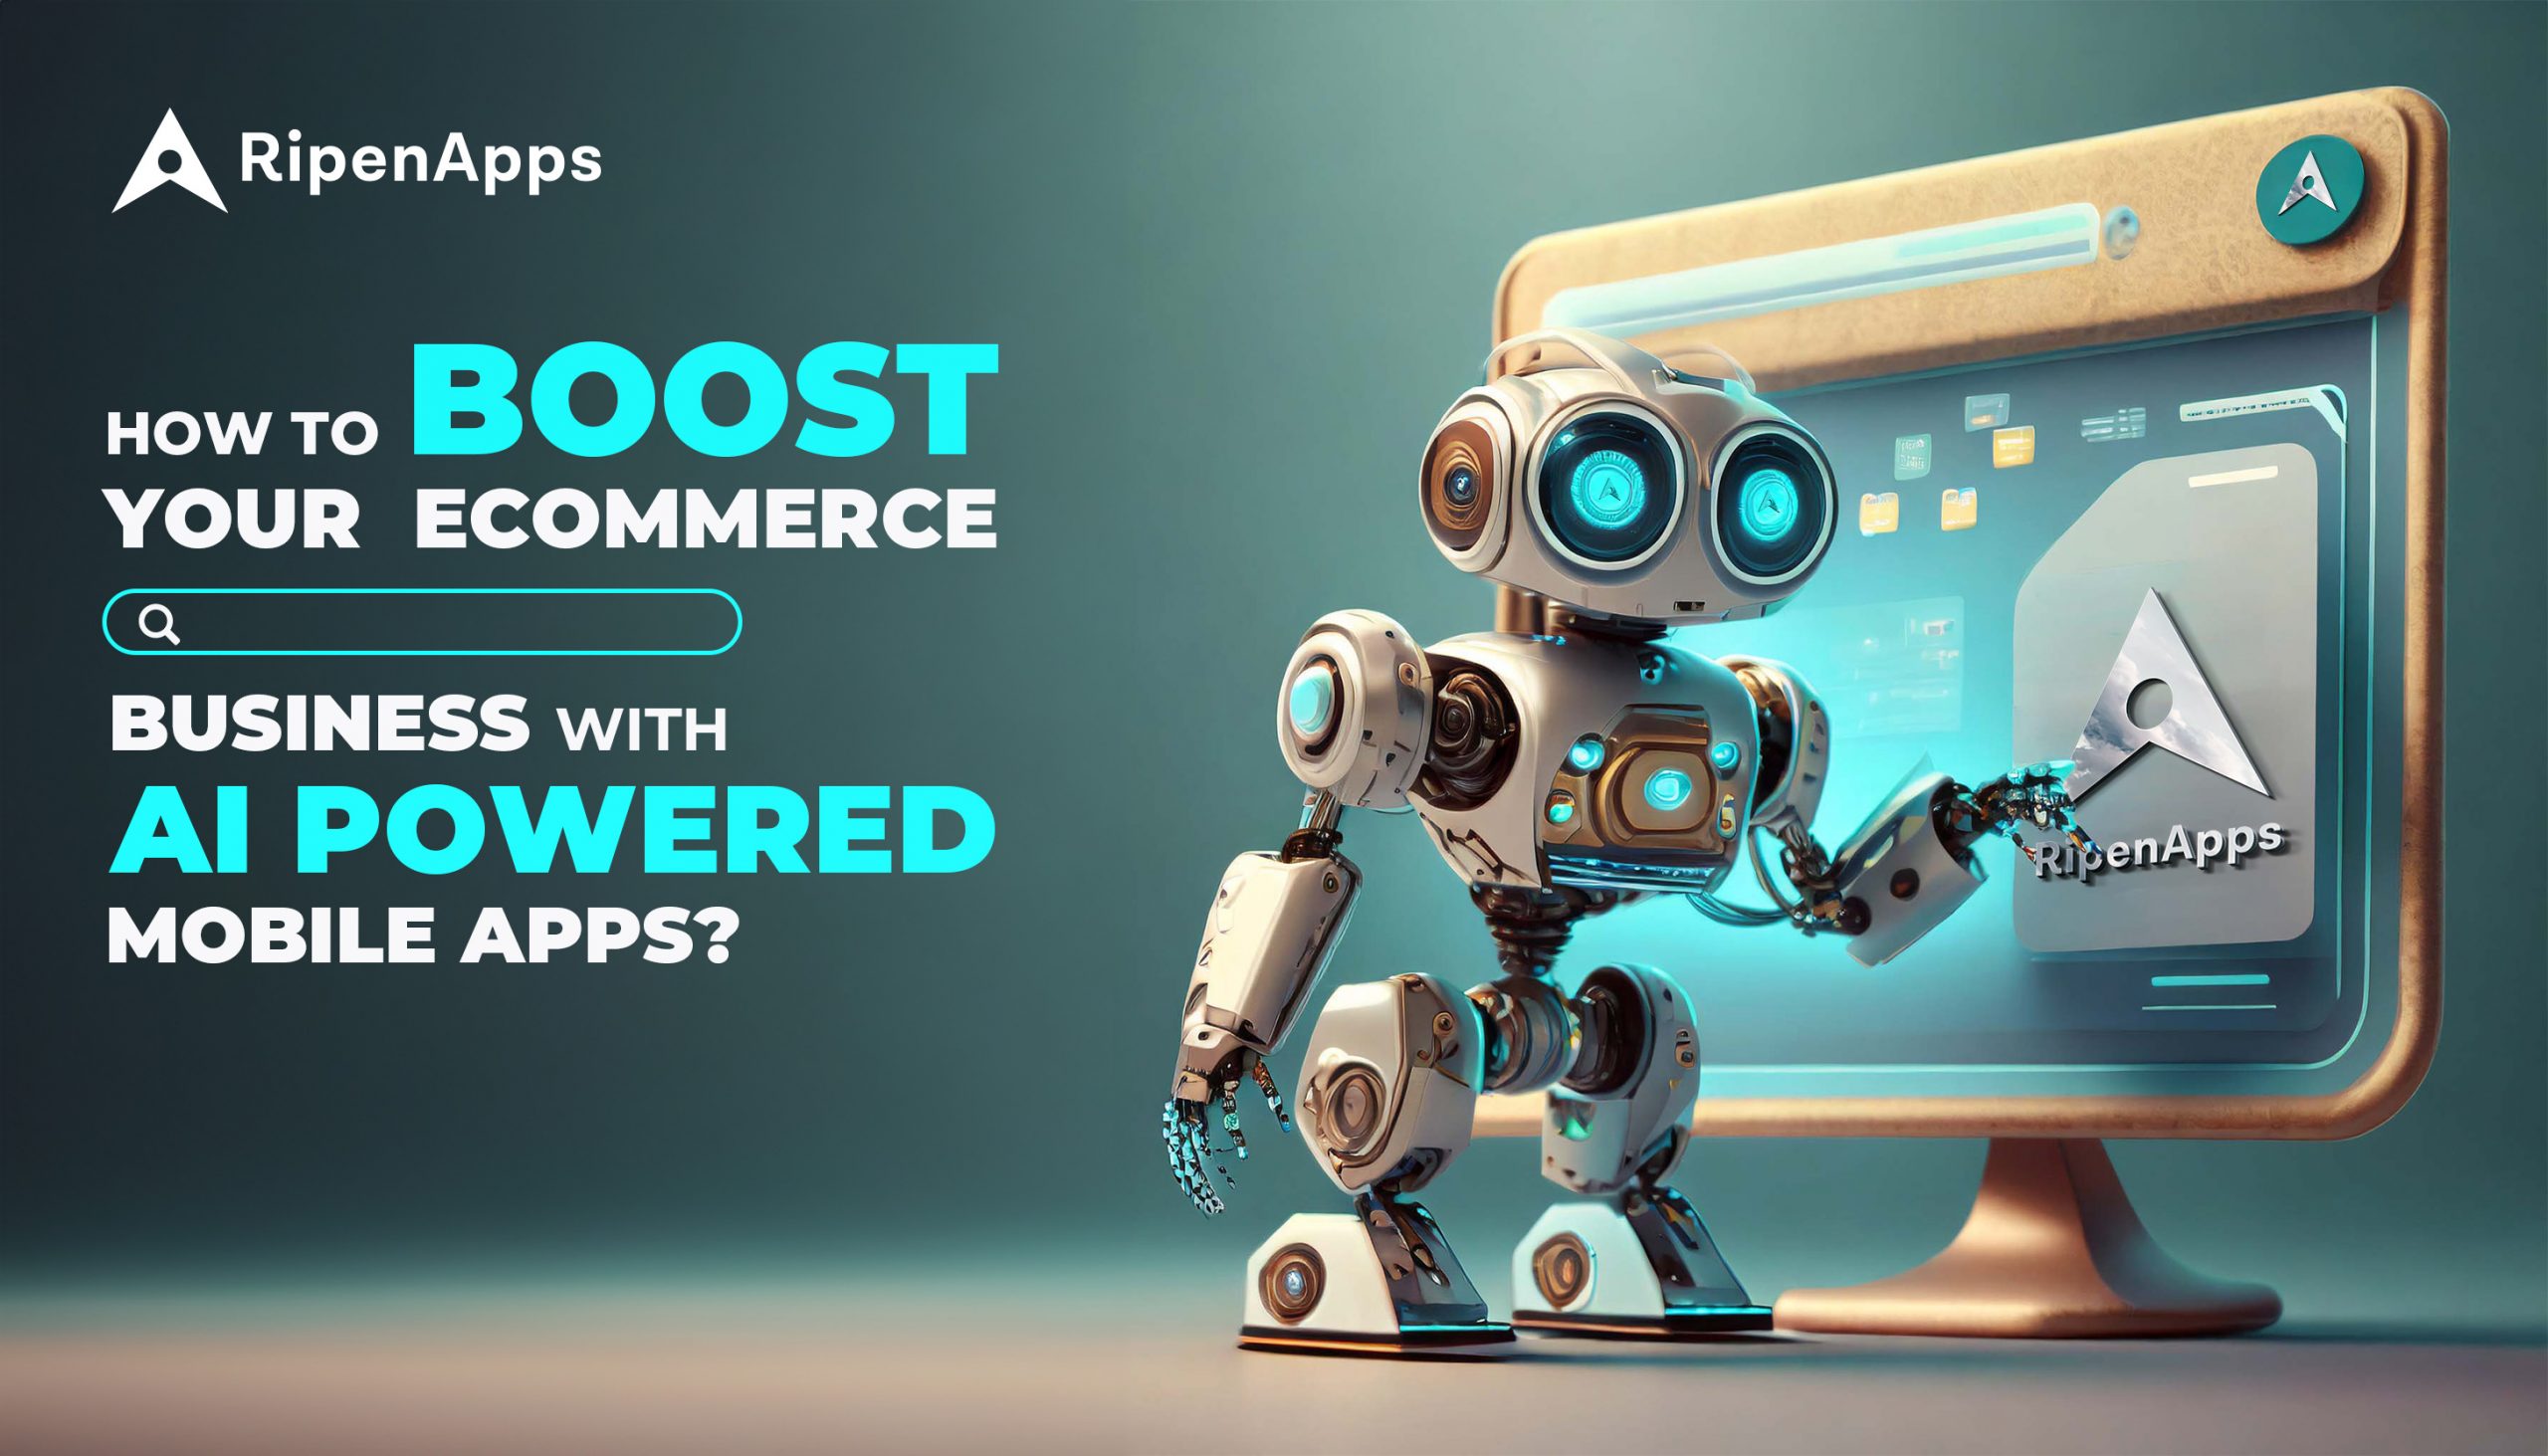 How To Boost Your Ecommerce Business With AI Powered Mobile Apps?